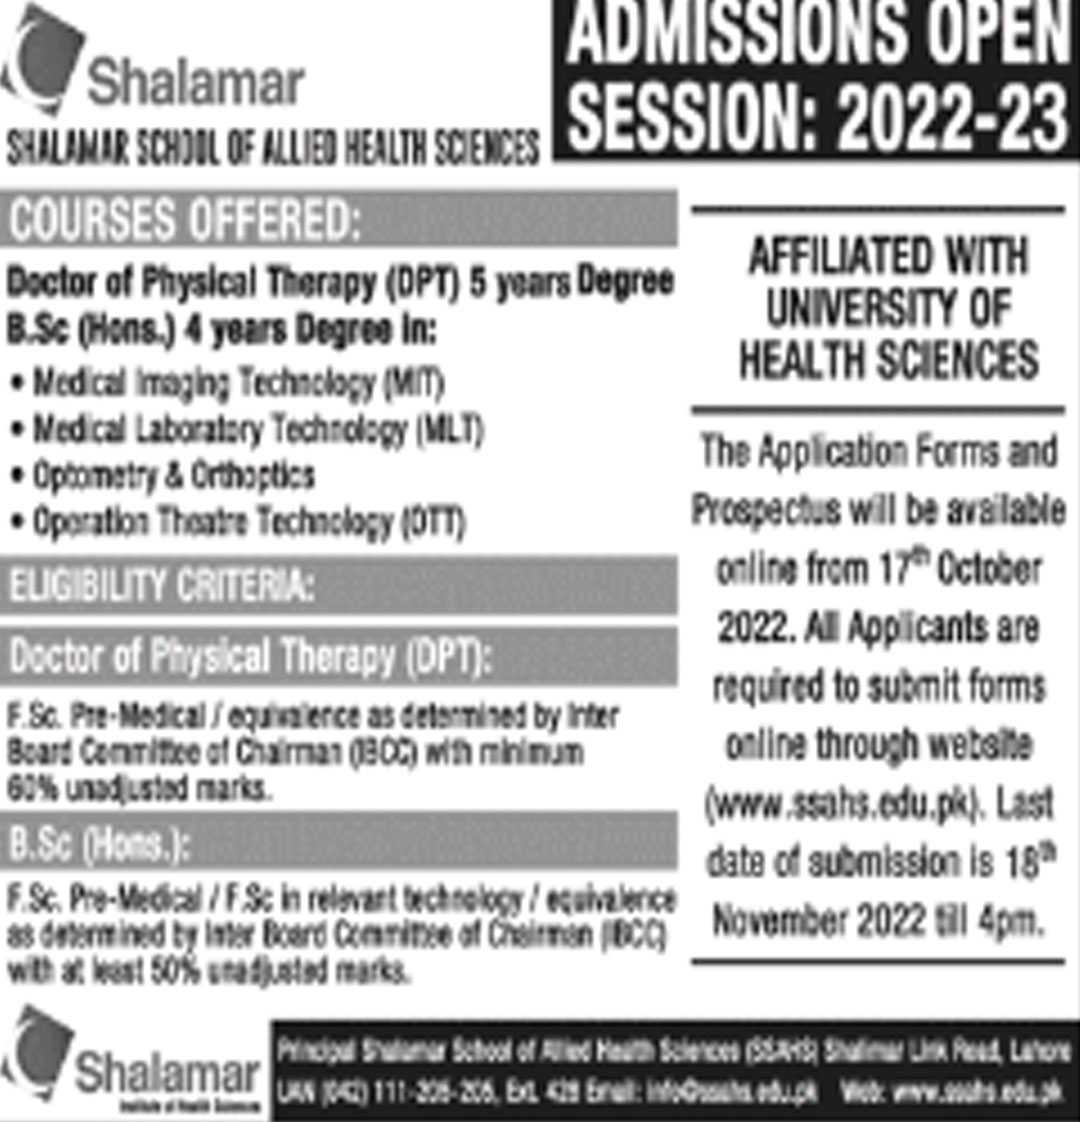 Shalamar School of Allied Health Sciences Lahore admission 2023